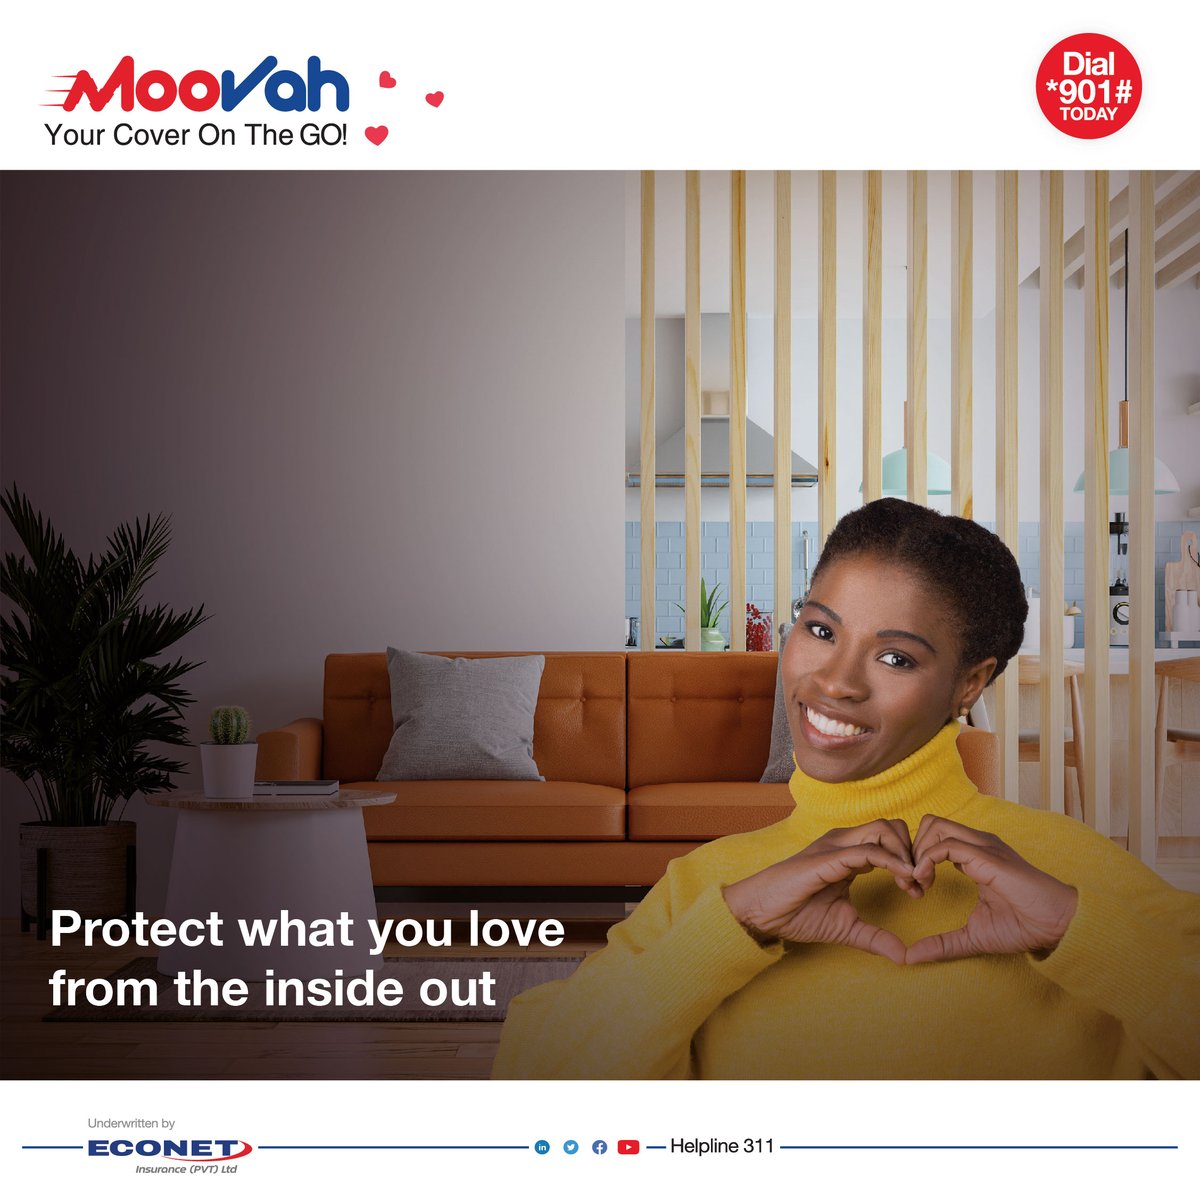 Cover your home and property with Moovah today.

#ProtectWhatyouLove